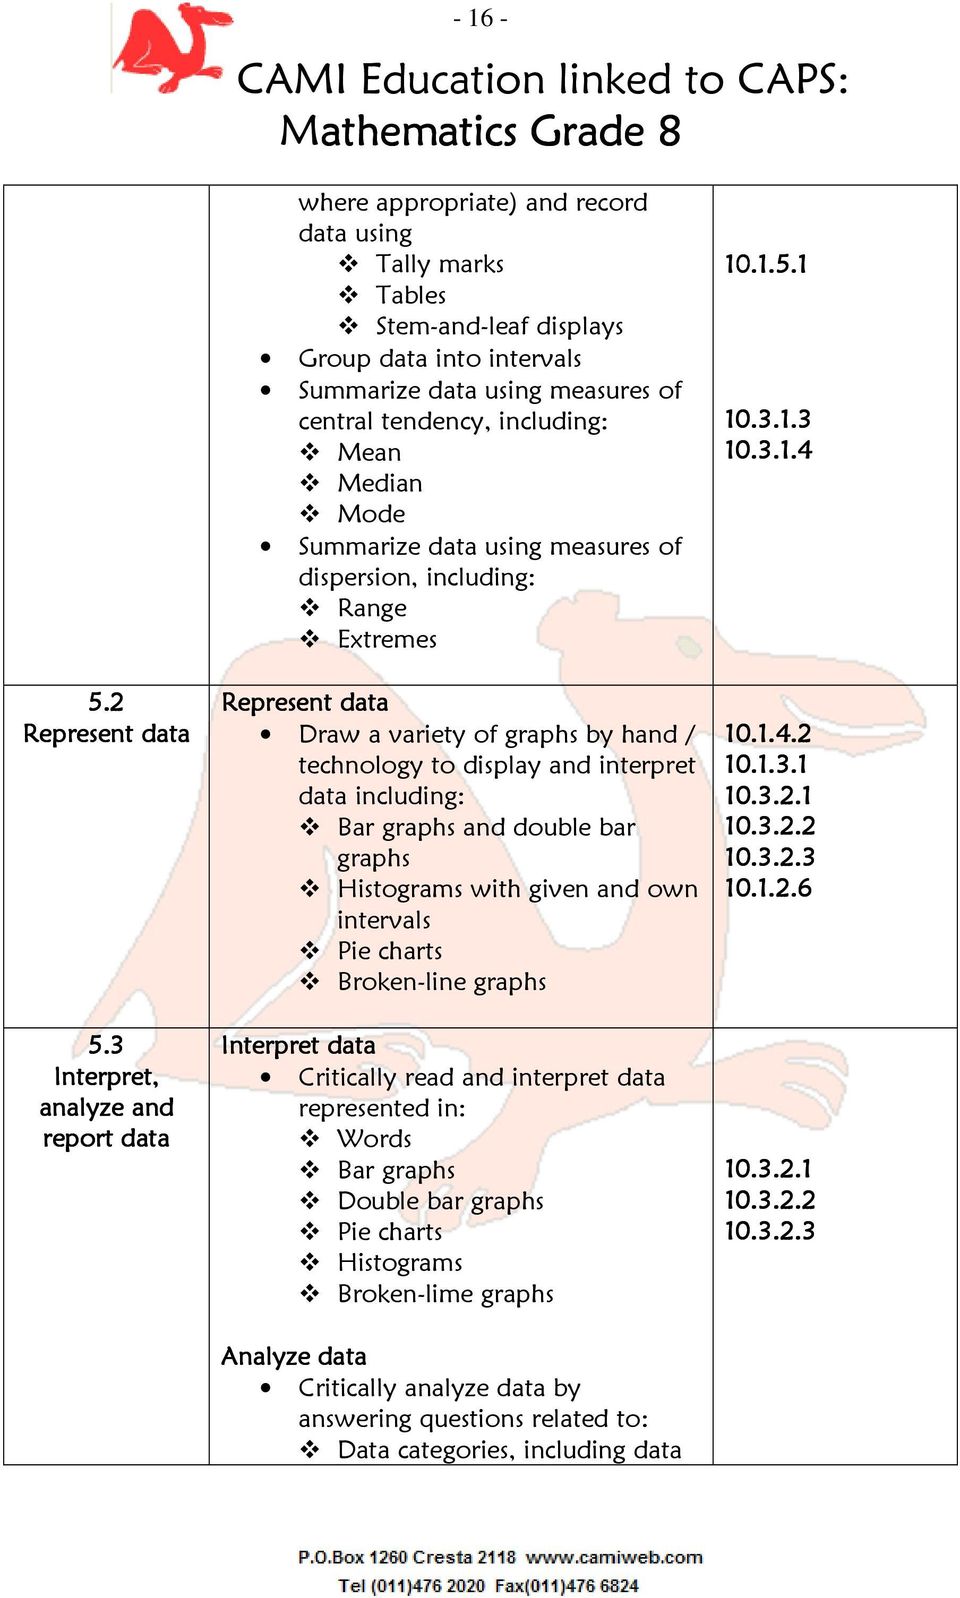 including: Mean Median Mode Summarize data using measures of dispersion, including: Range Extremes Represent data Draw a variety of graphs by hand / technology to display and interpret data